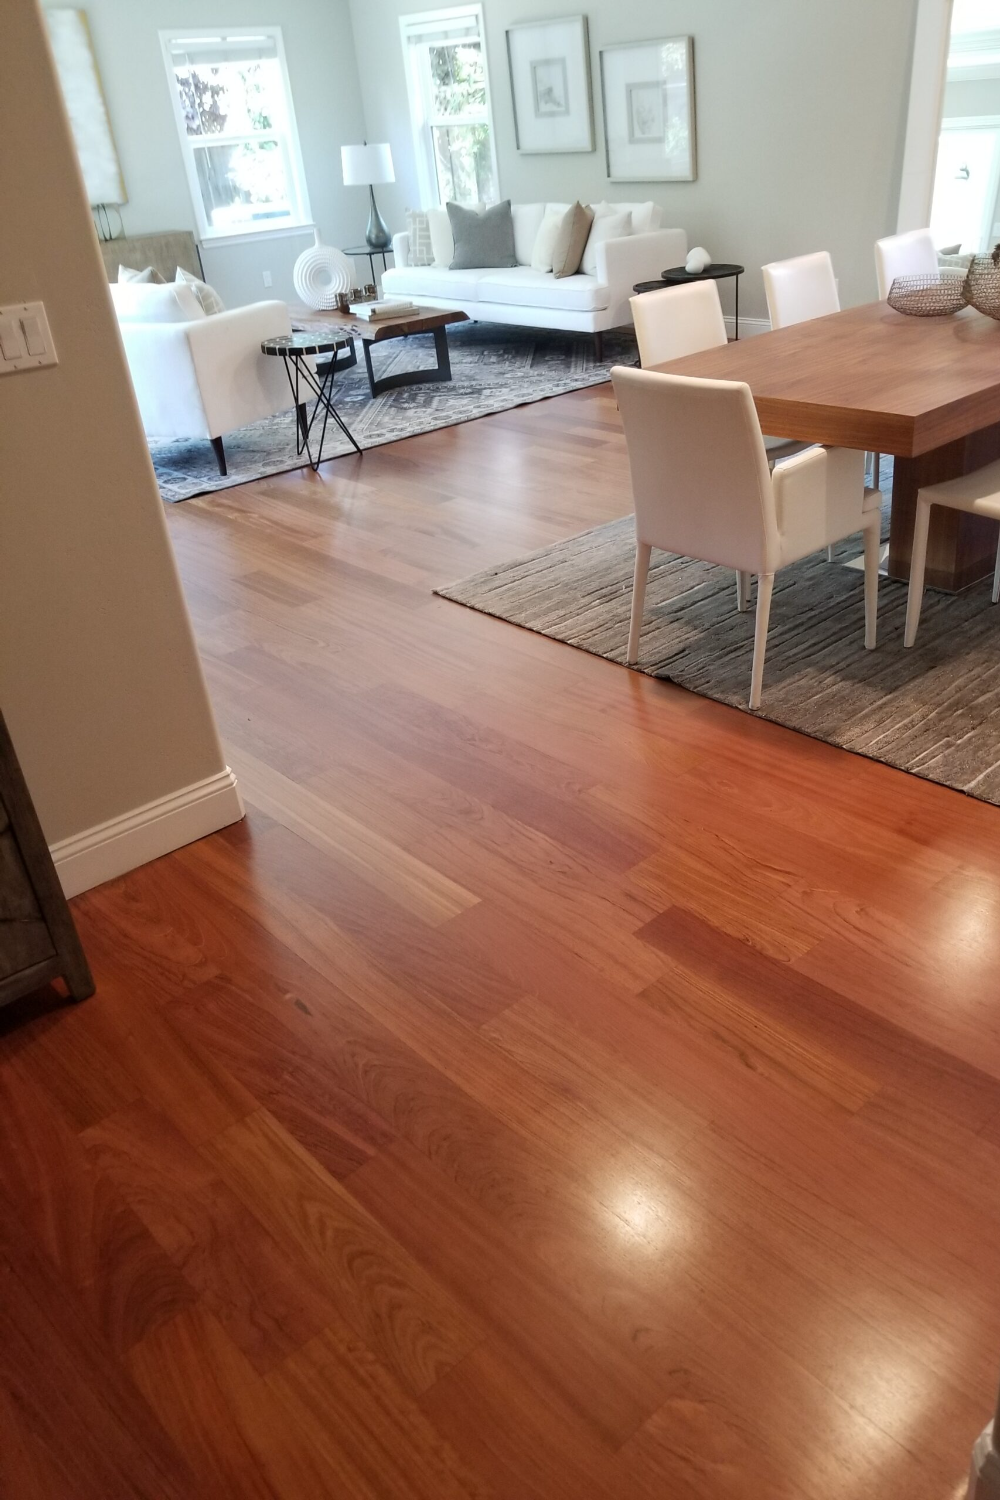 How to decorate your home with brazilian
cherry hardwood flooring?